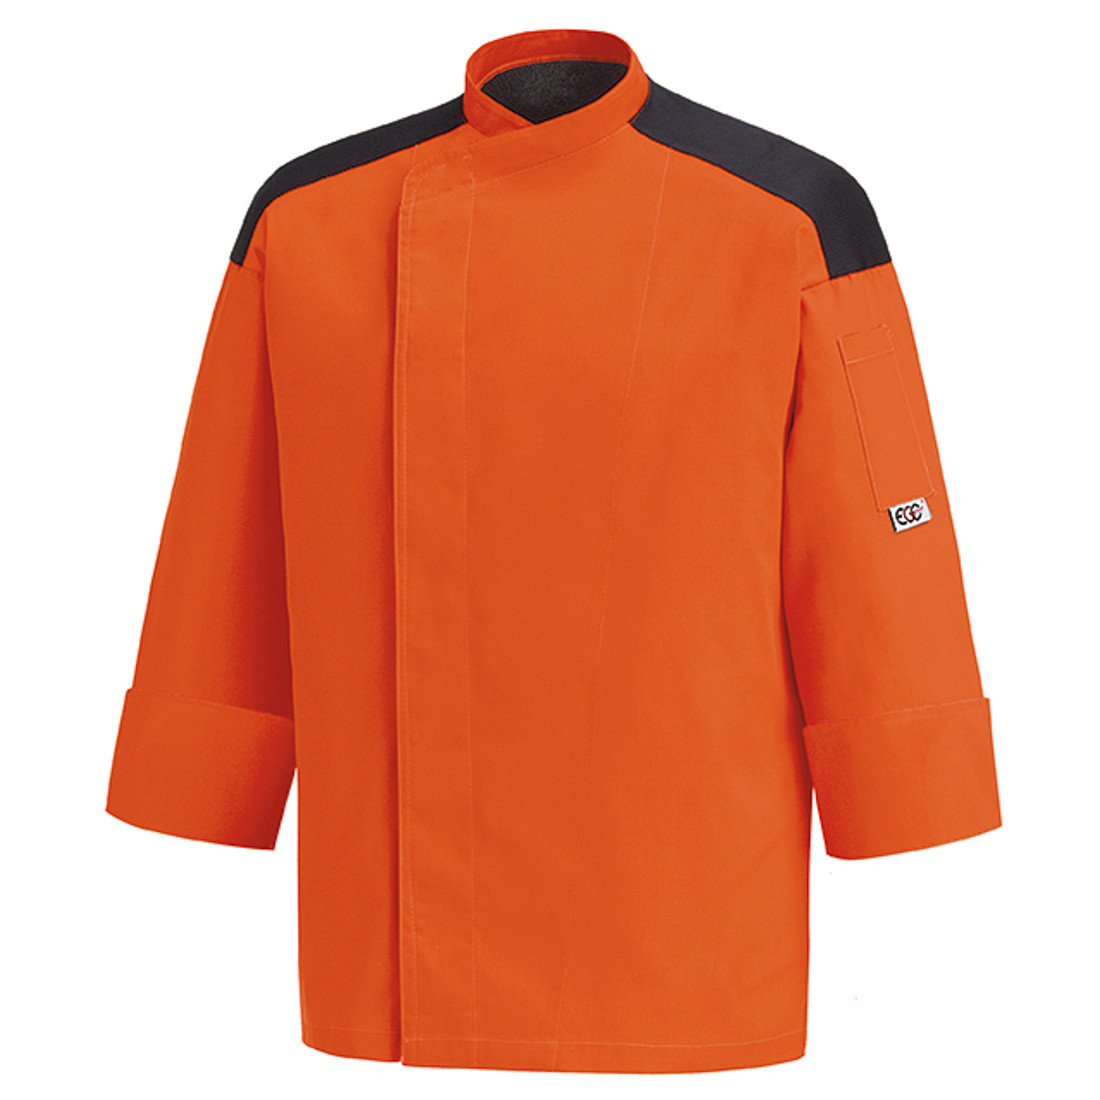 First Chef's Jacket, 65% poliester/35% bumbac - Safetywear